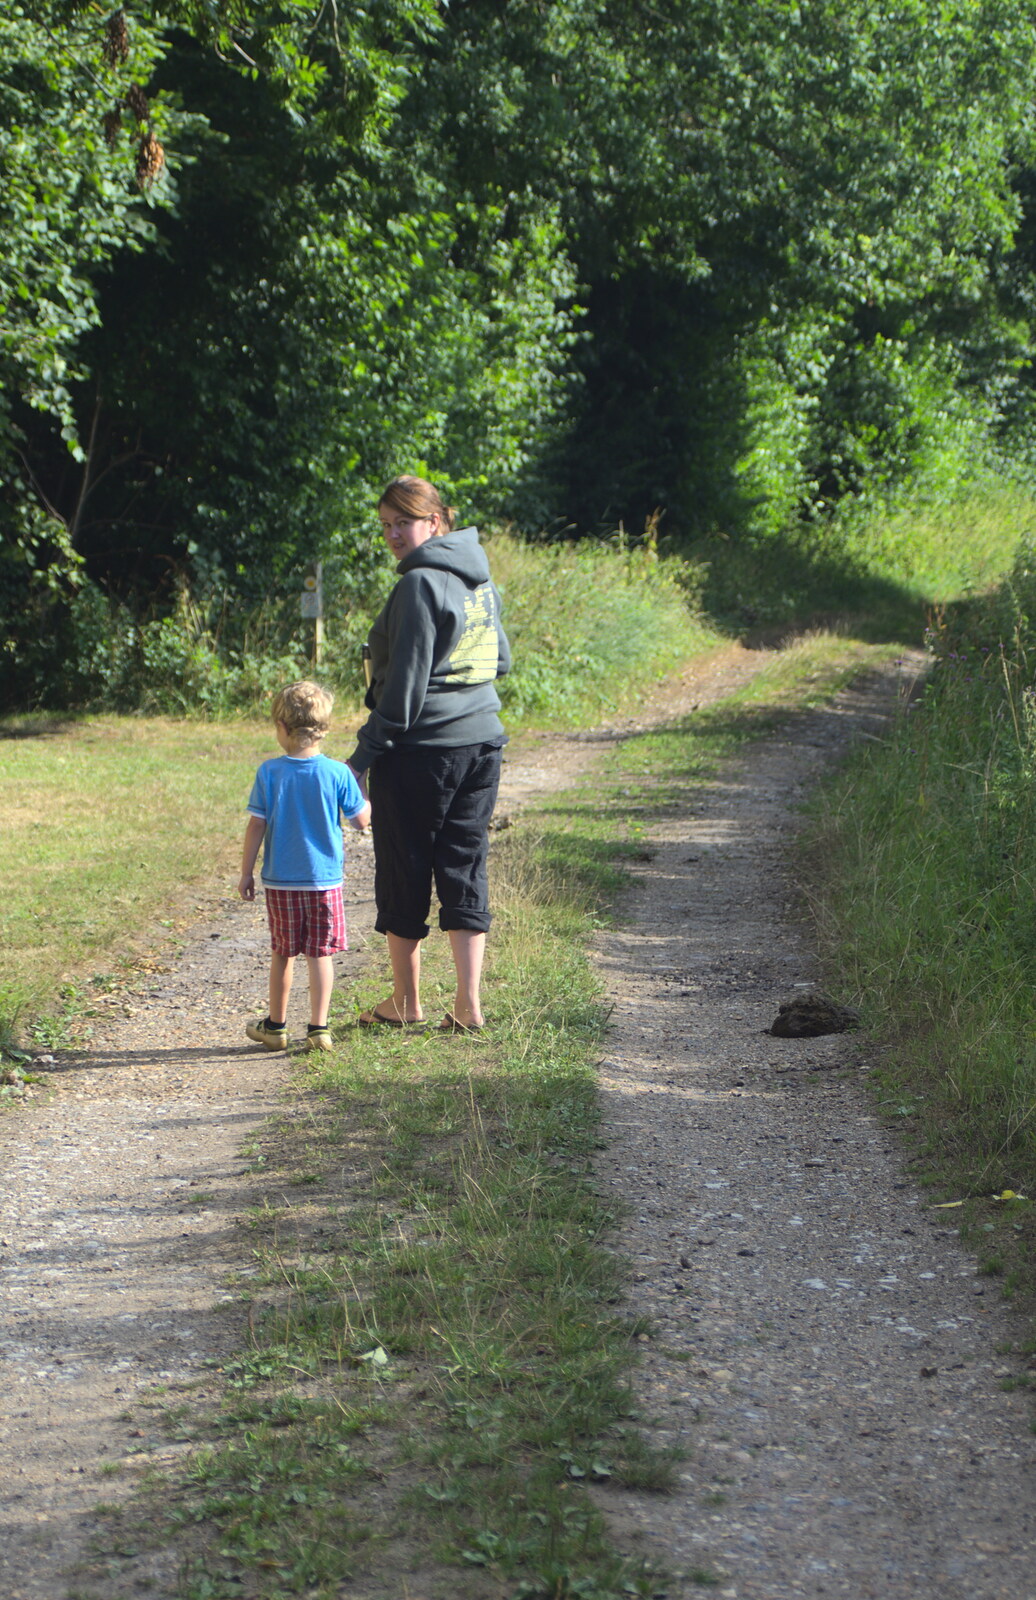 We head off to explore the nearby woods from Henry's 60th Birthday, Hethel, Norfolk - 3rd August 2013